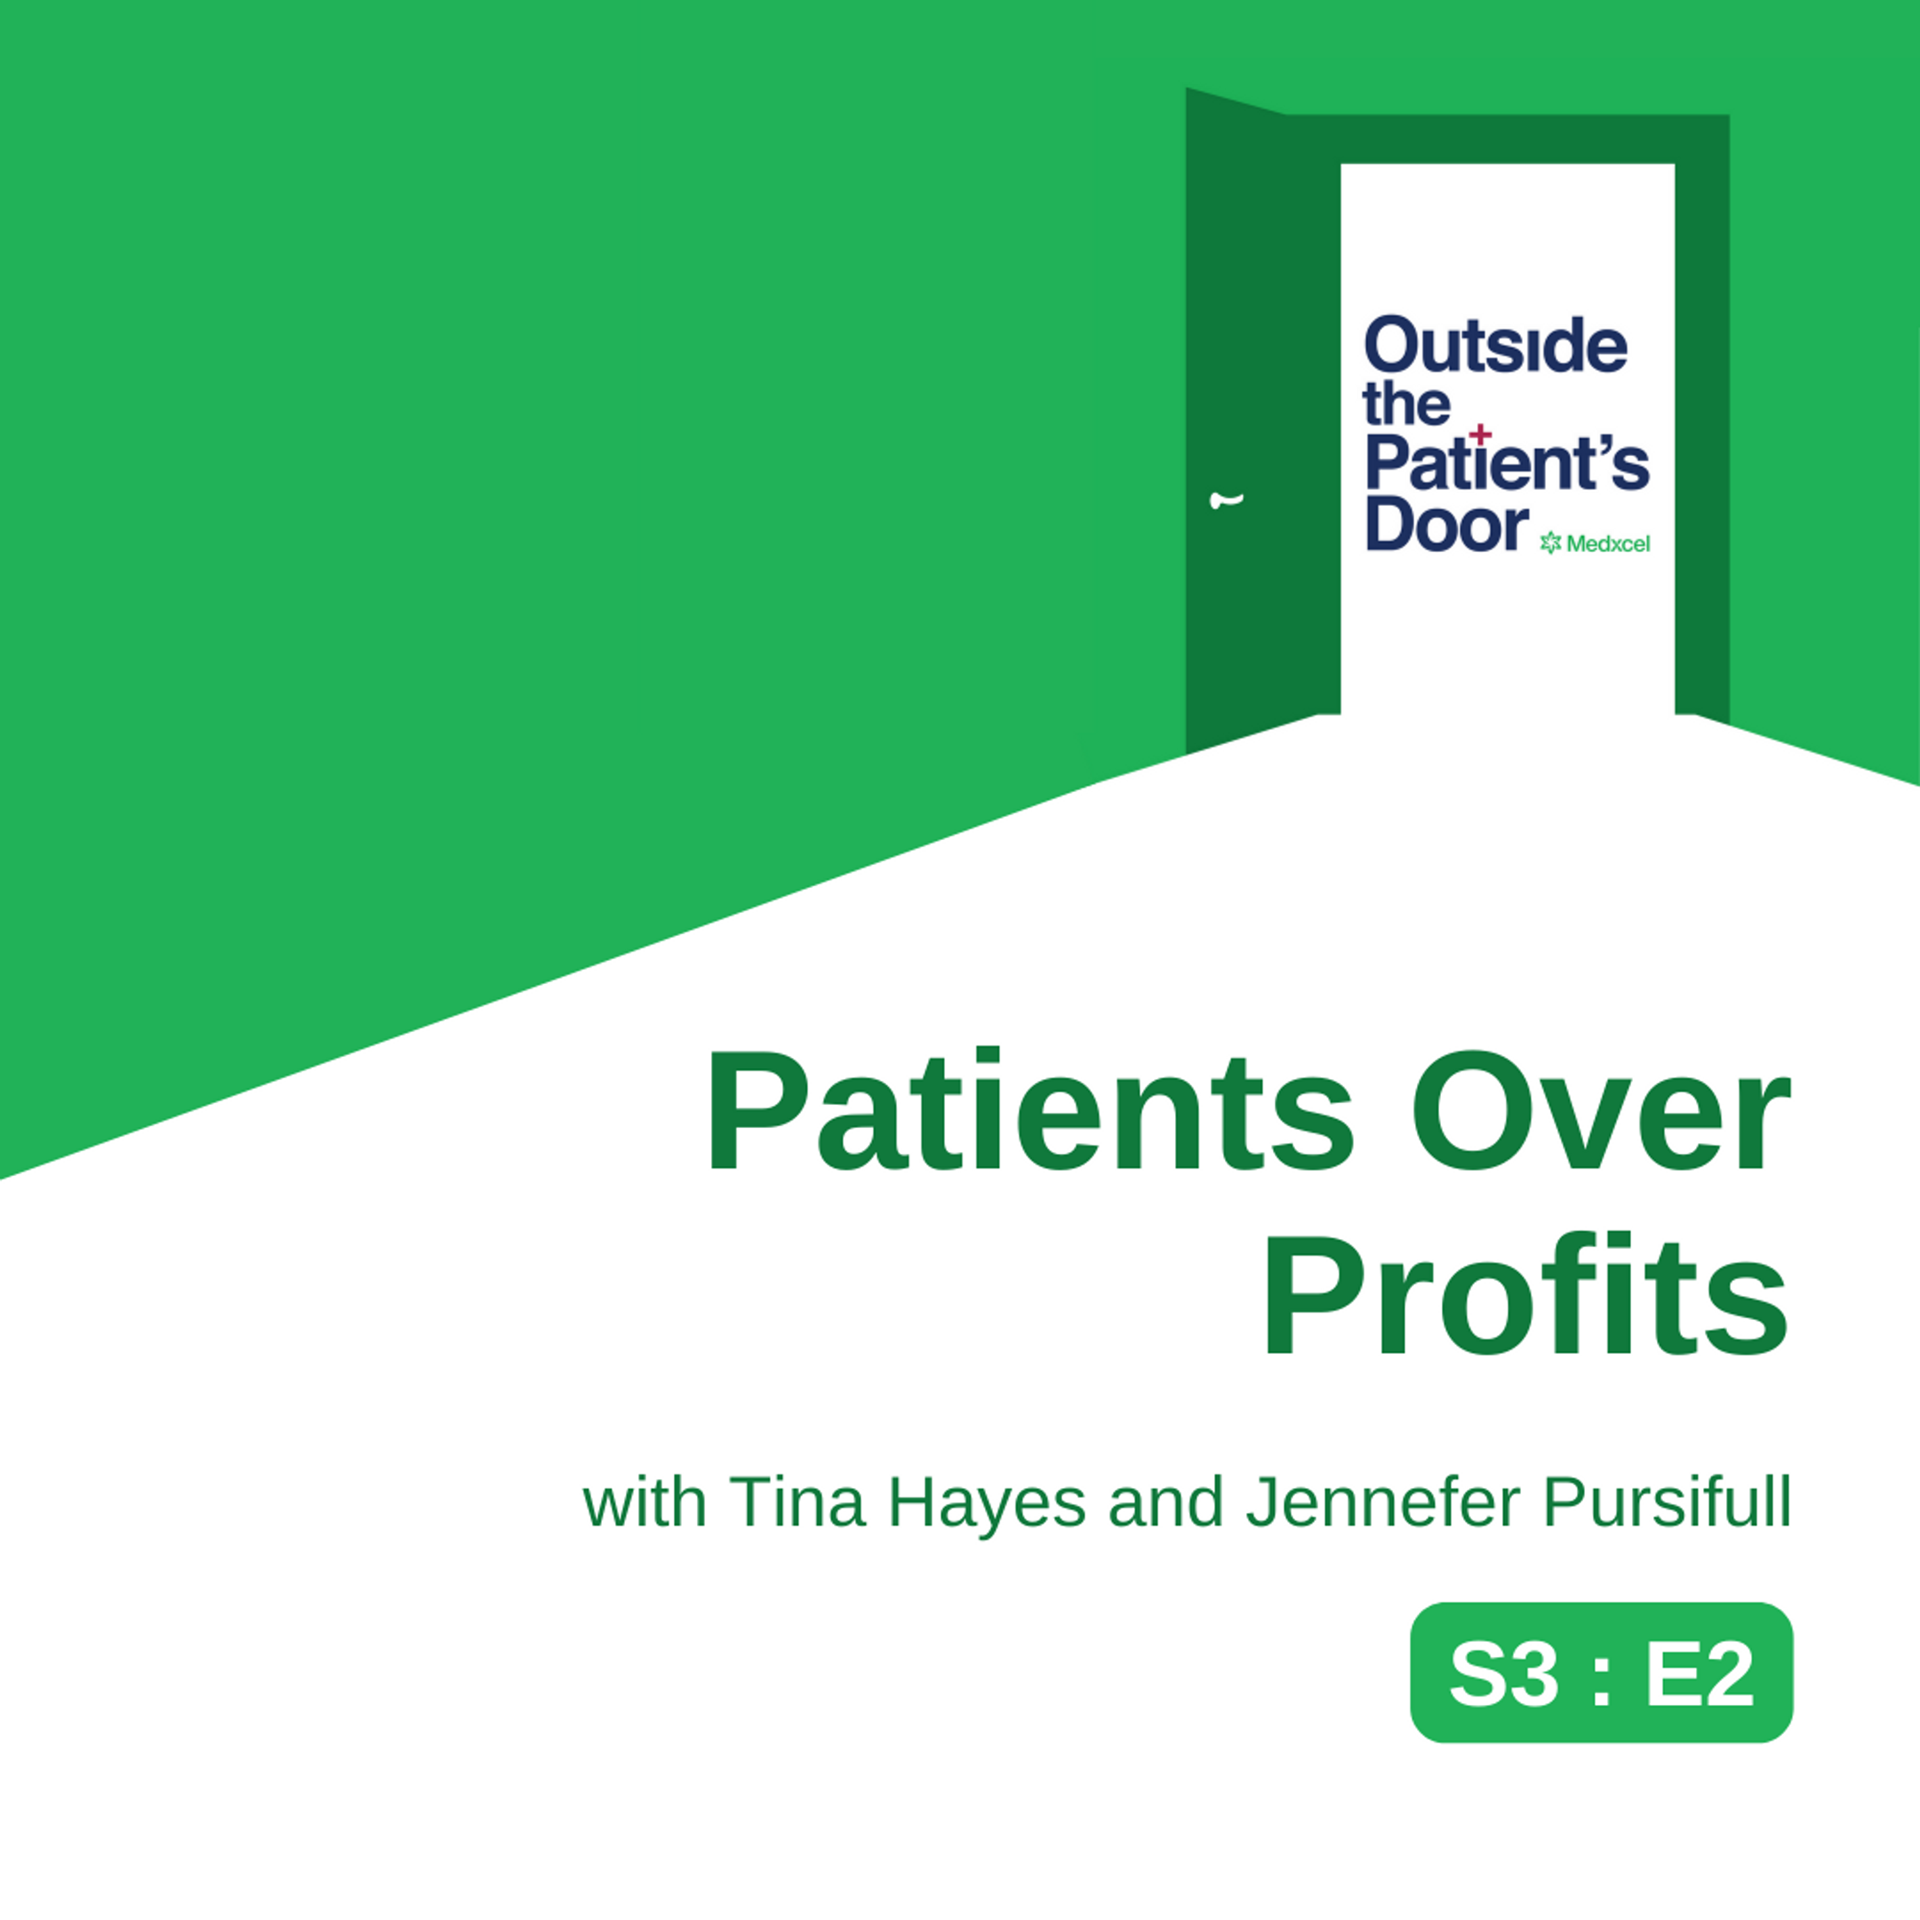 S3 E2: Patients Over Profits with Tina Hayes and Jennefer Pursifull